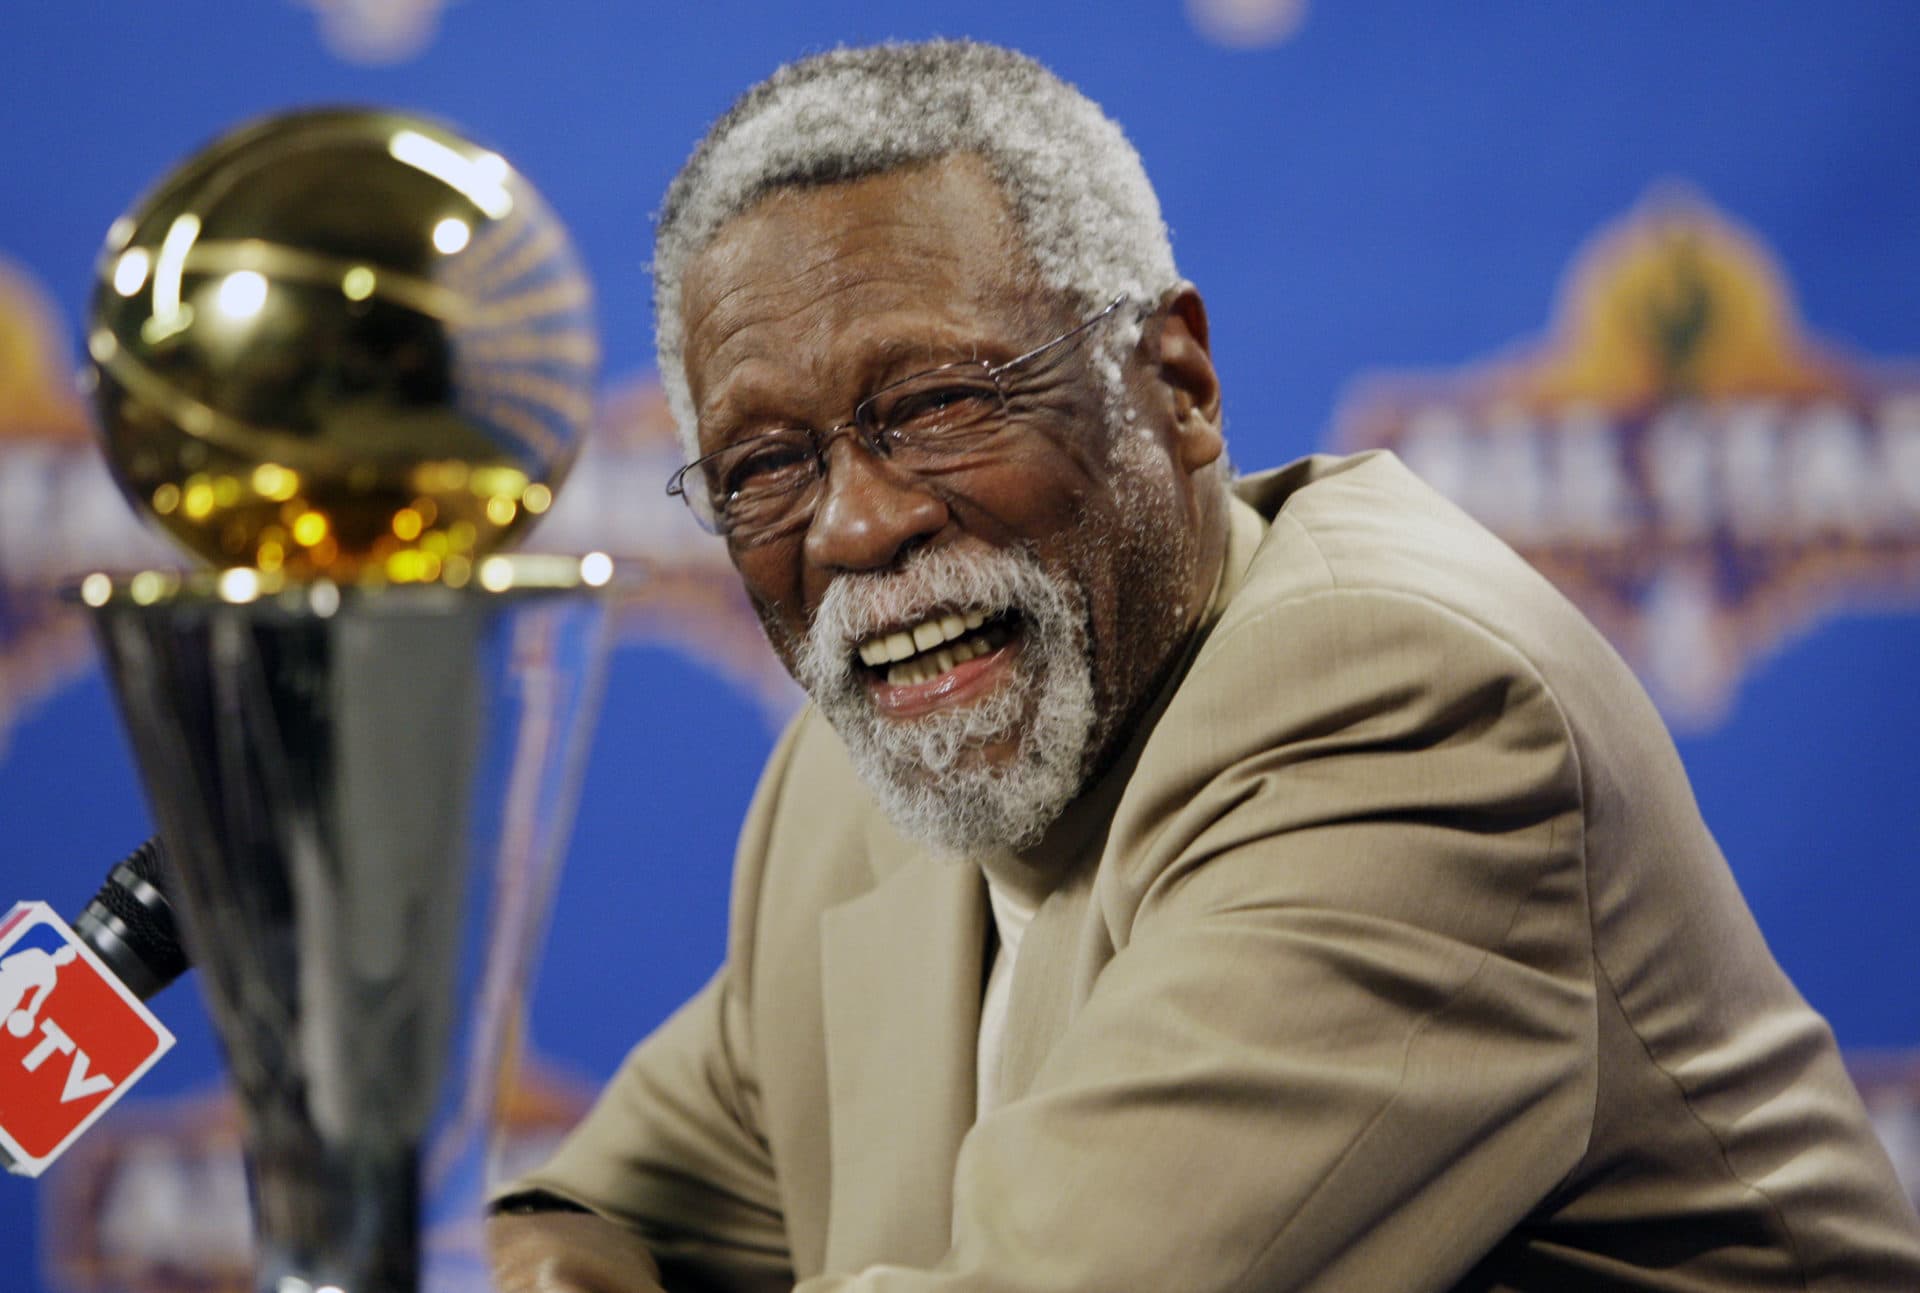 NBA great Bill Russell reacts at a news conference as he learns the most valuable player award for the NBA basketball championships has been renamed the Bill Russell NBA Finals Most Valuable Player Award, Feb. 14, 2009, in Phoenix. (Matt York/AP)